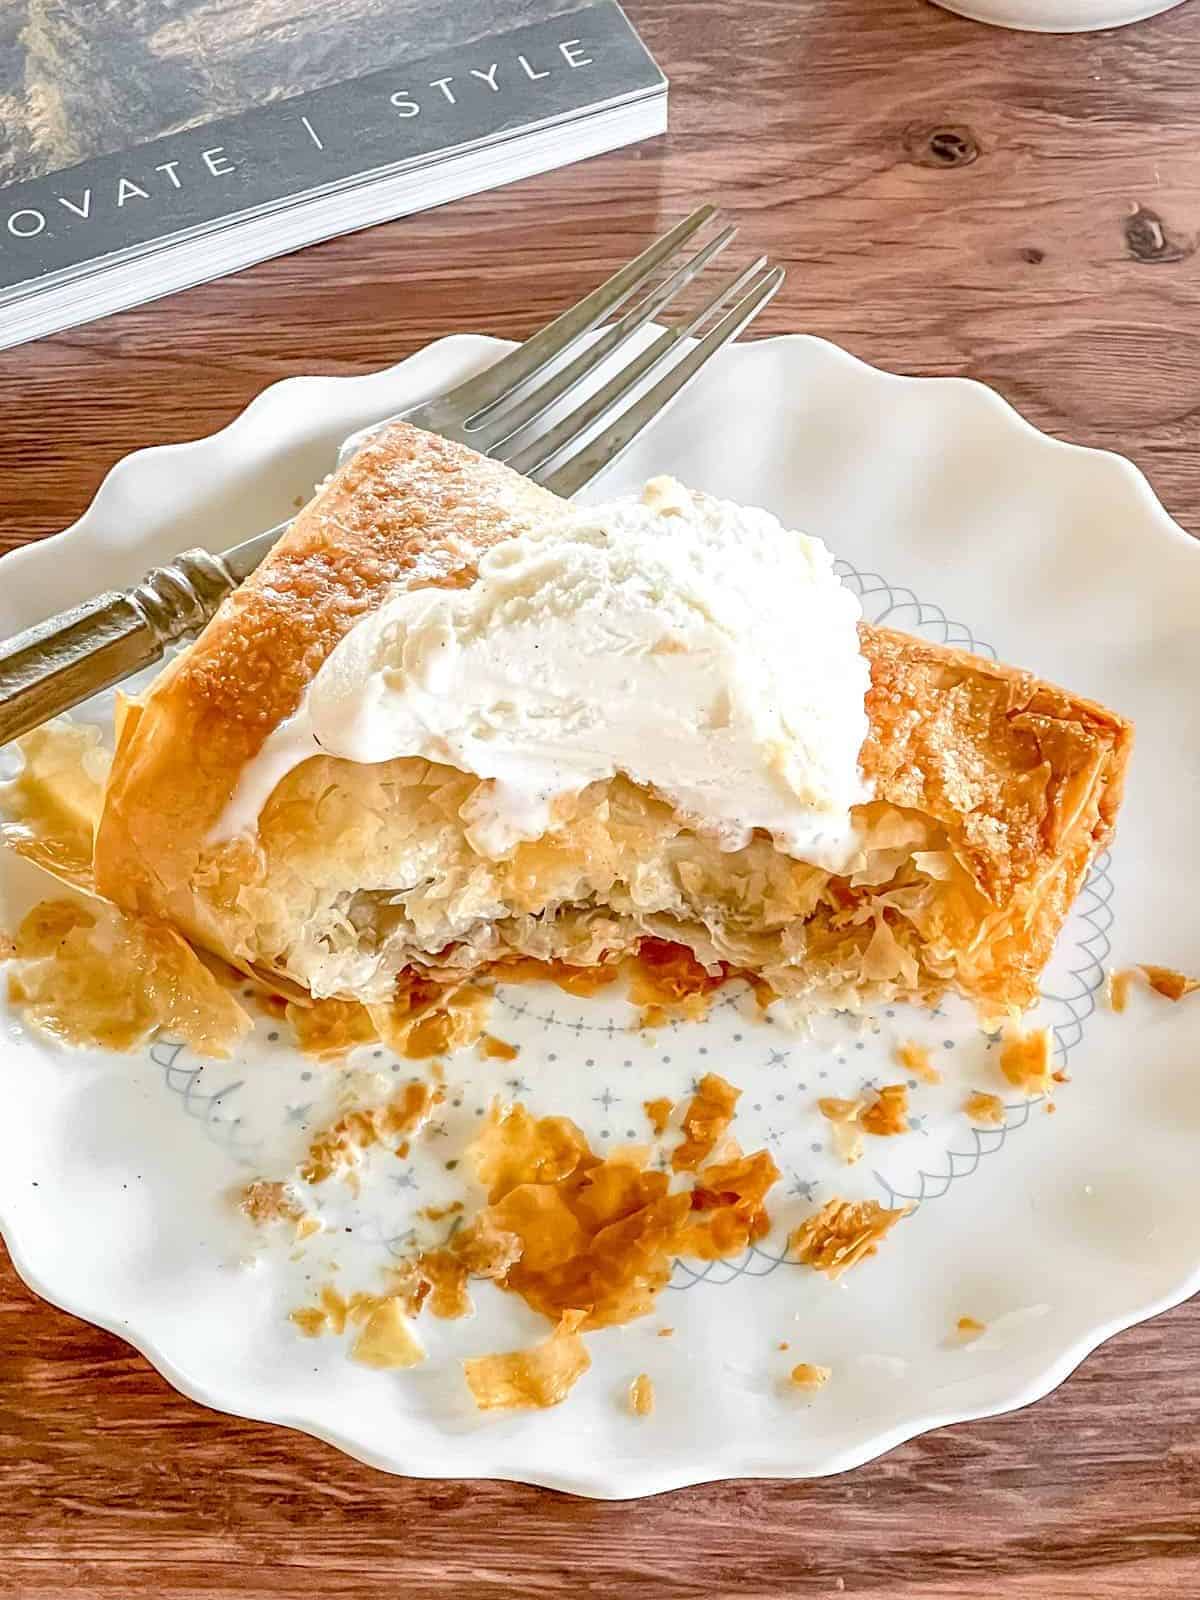 Apple strudel with apple filling covered in phyllo pastry.